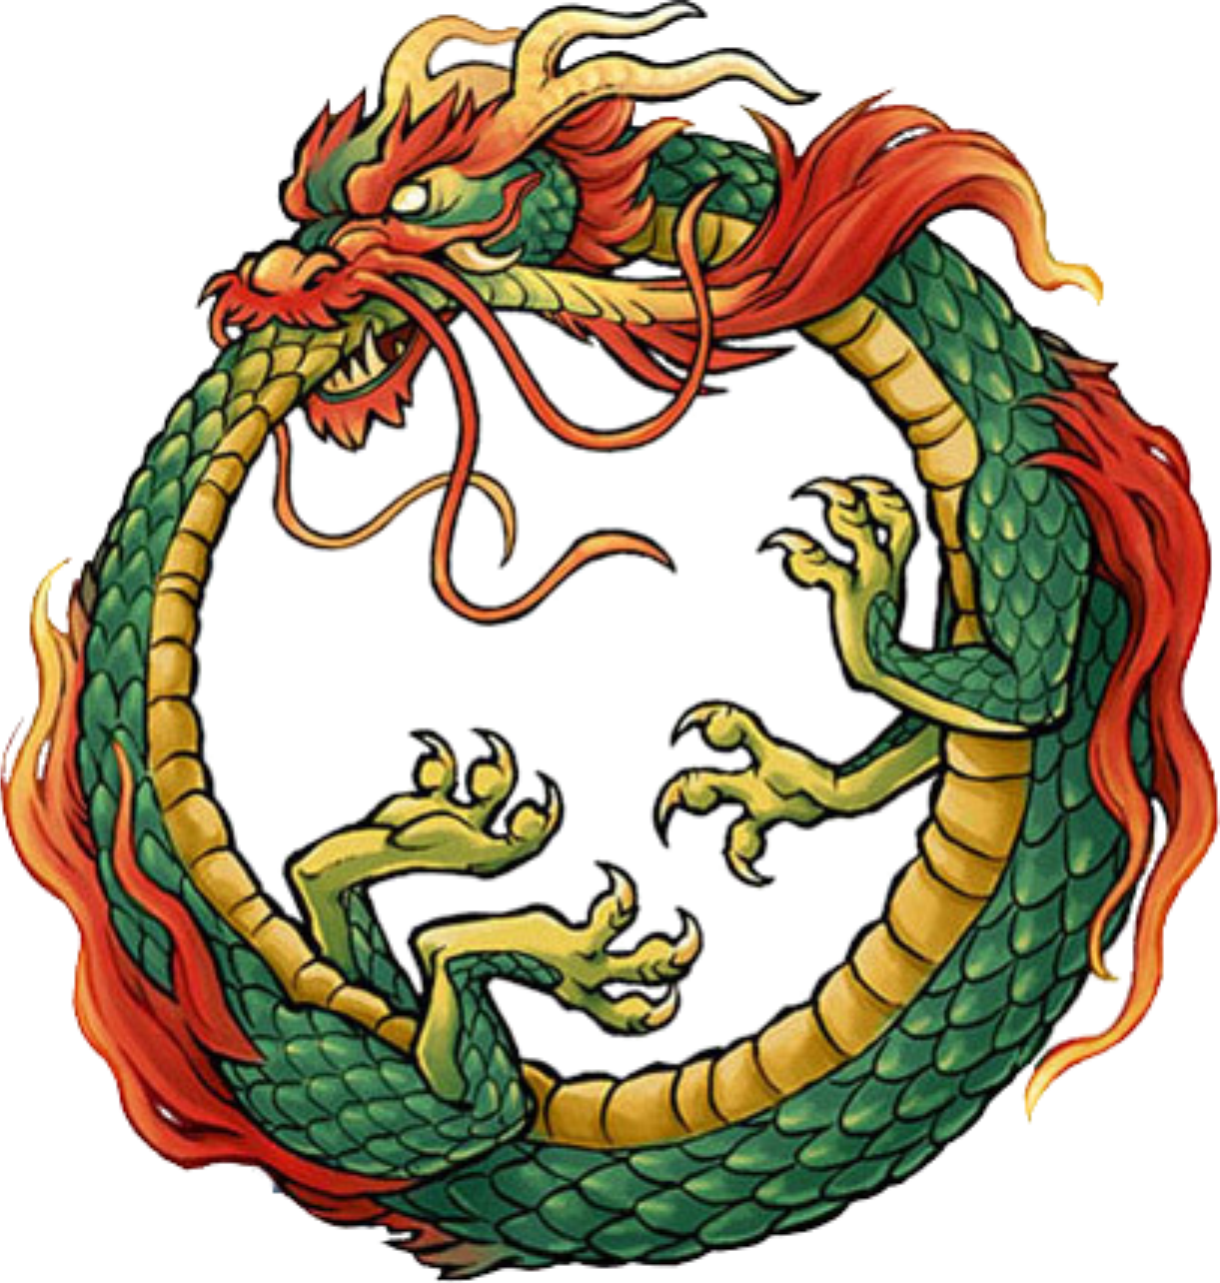 Infinity clipart infinity knot. The symbol ouroboros snake